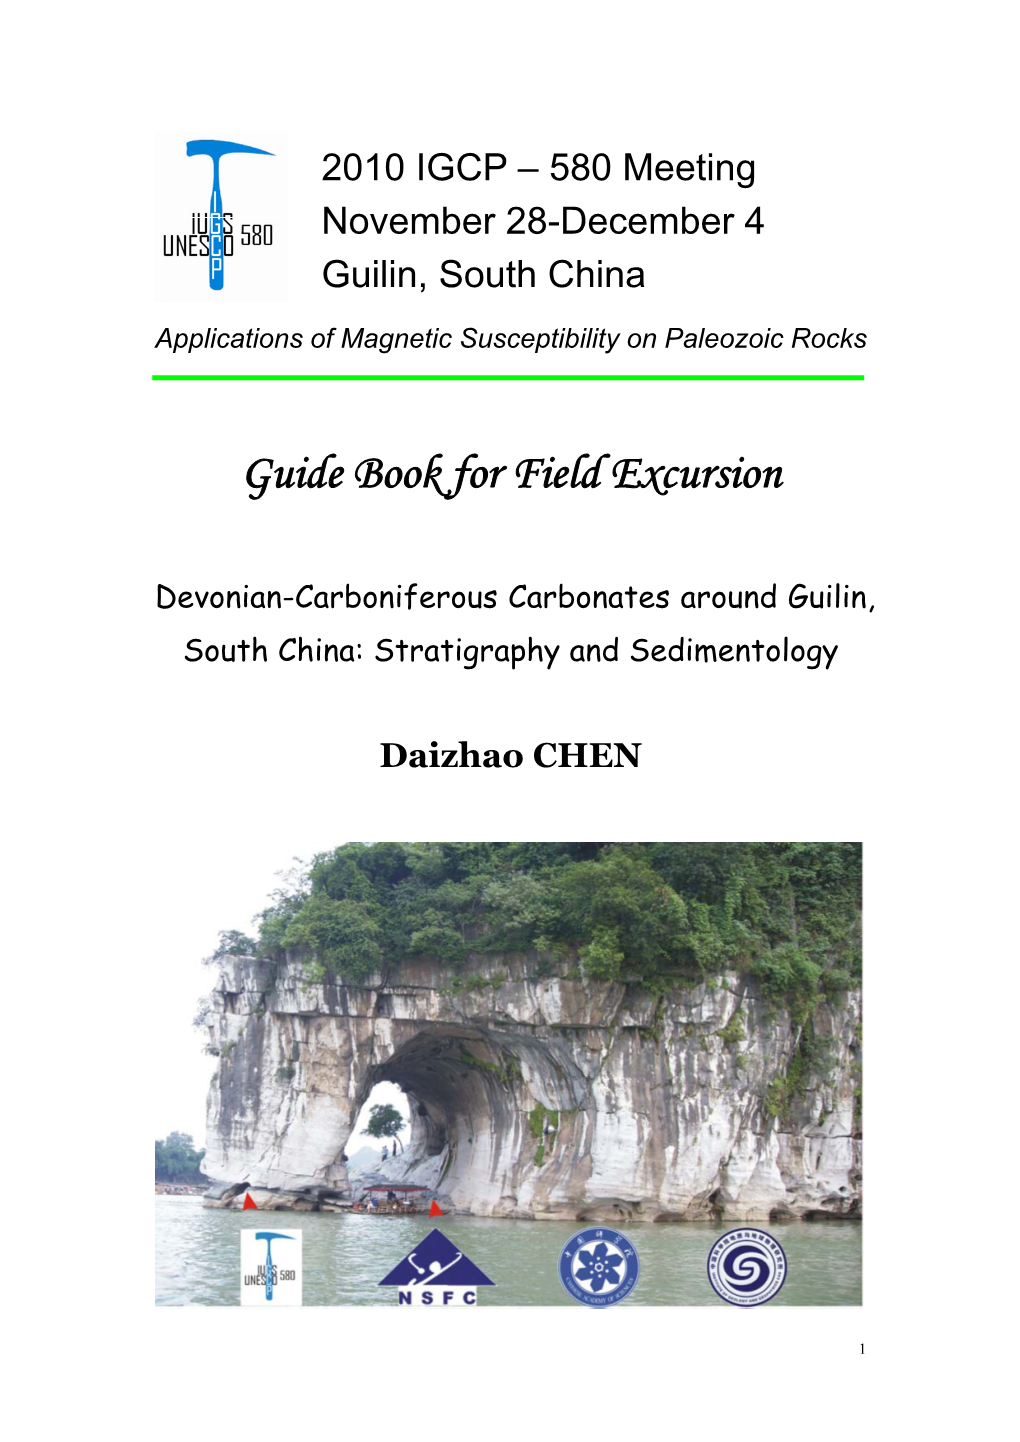 Guide Book for Field Excursion